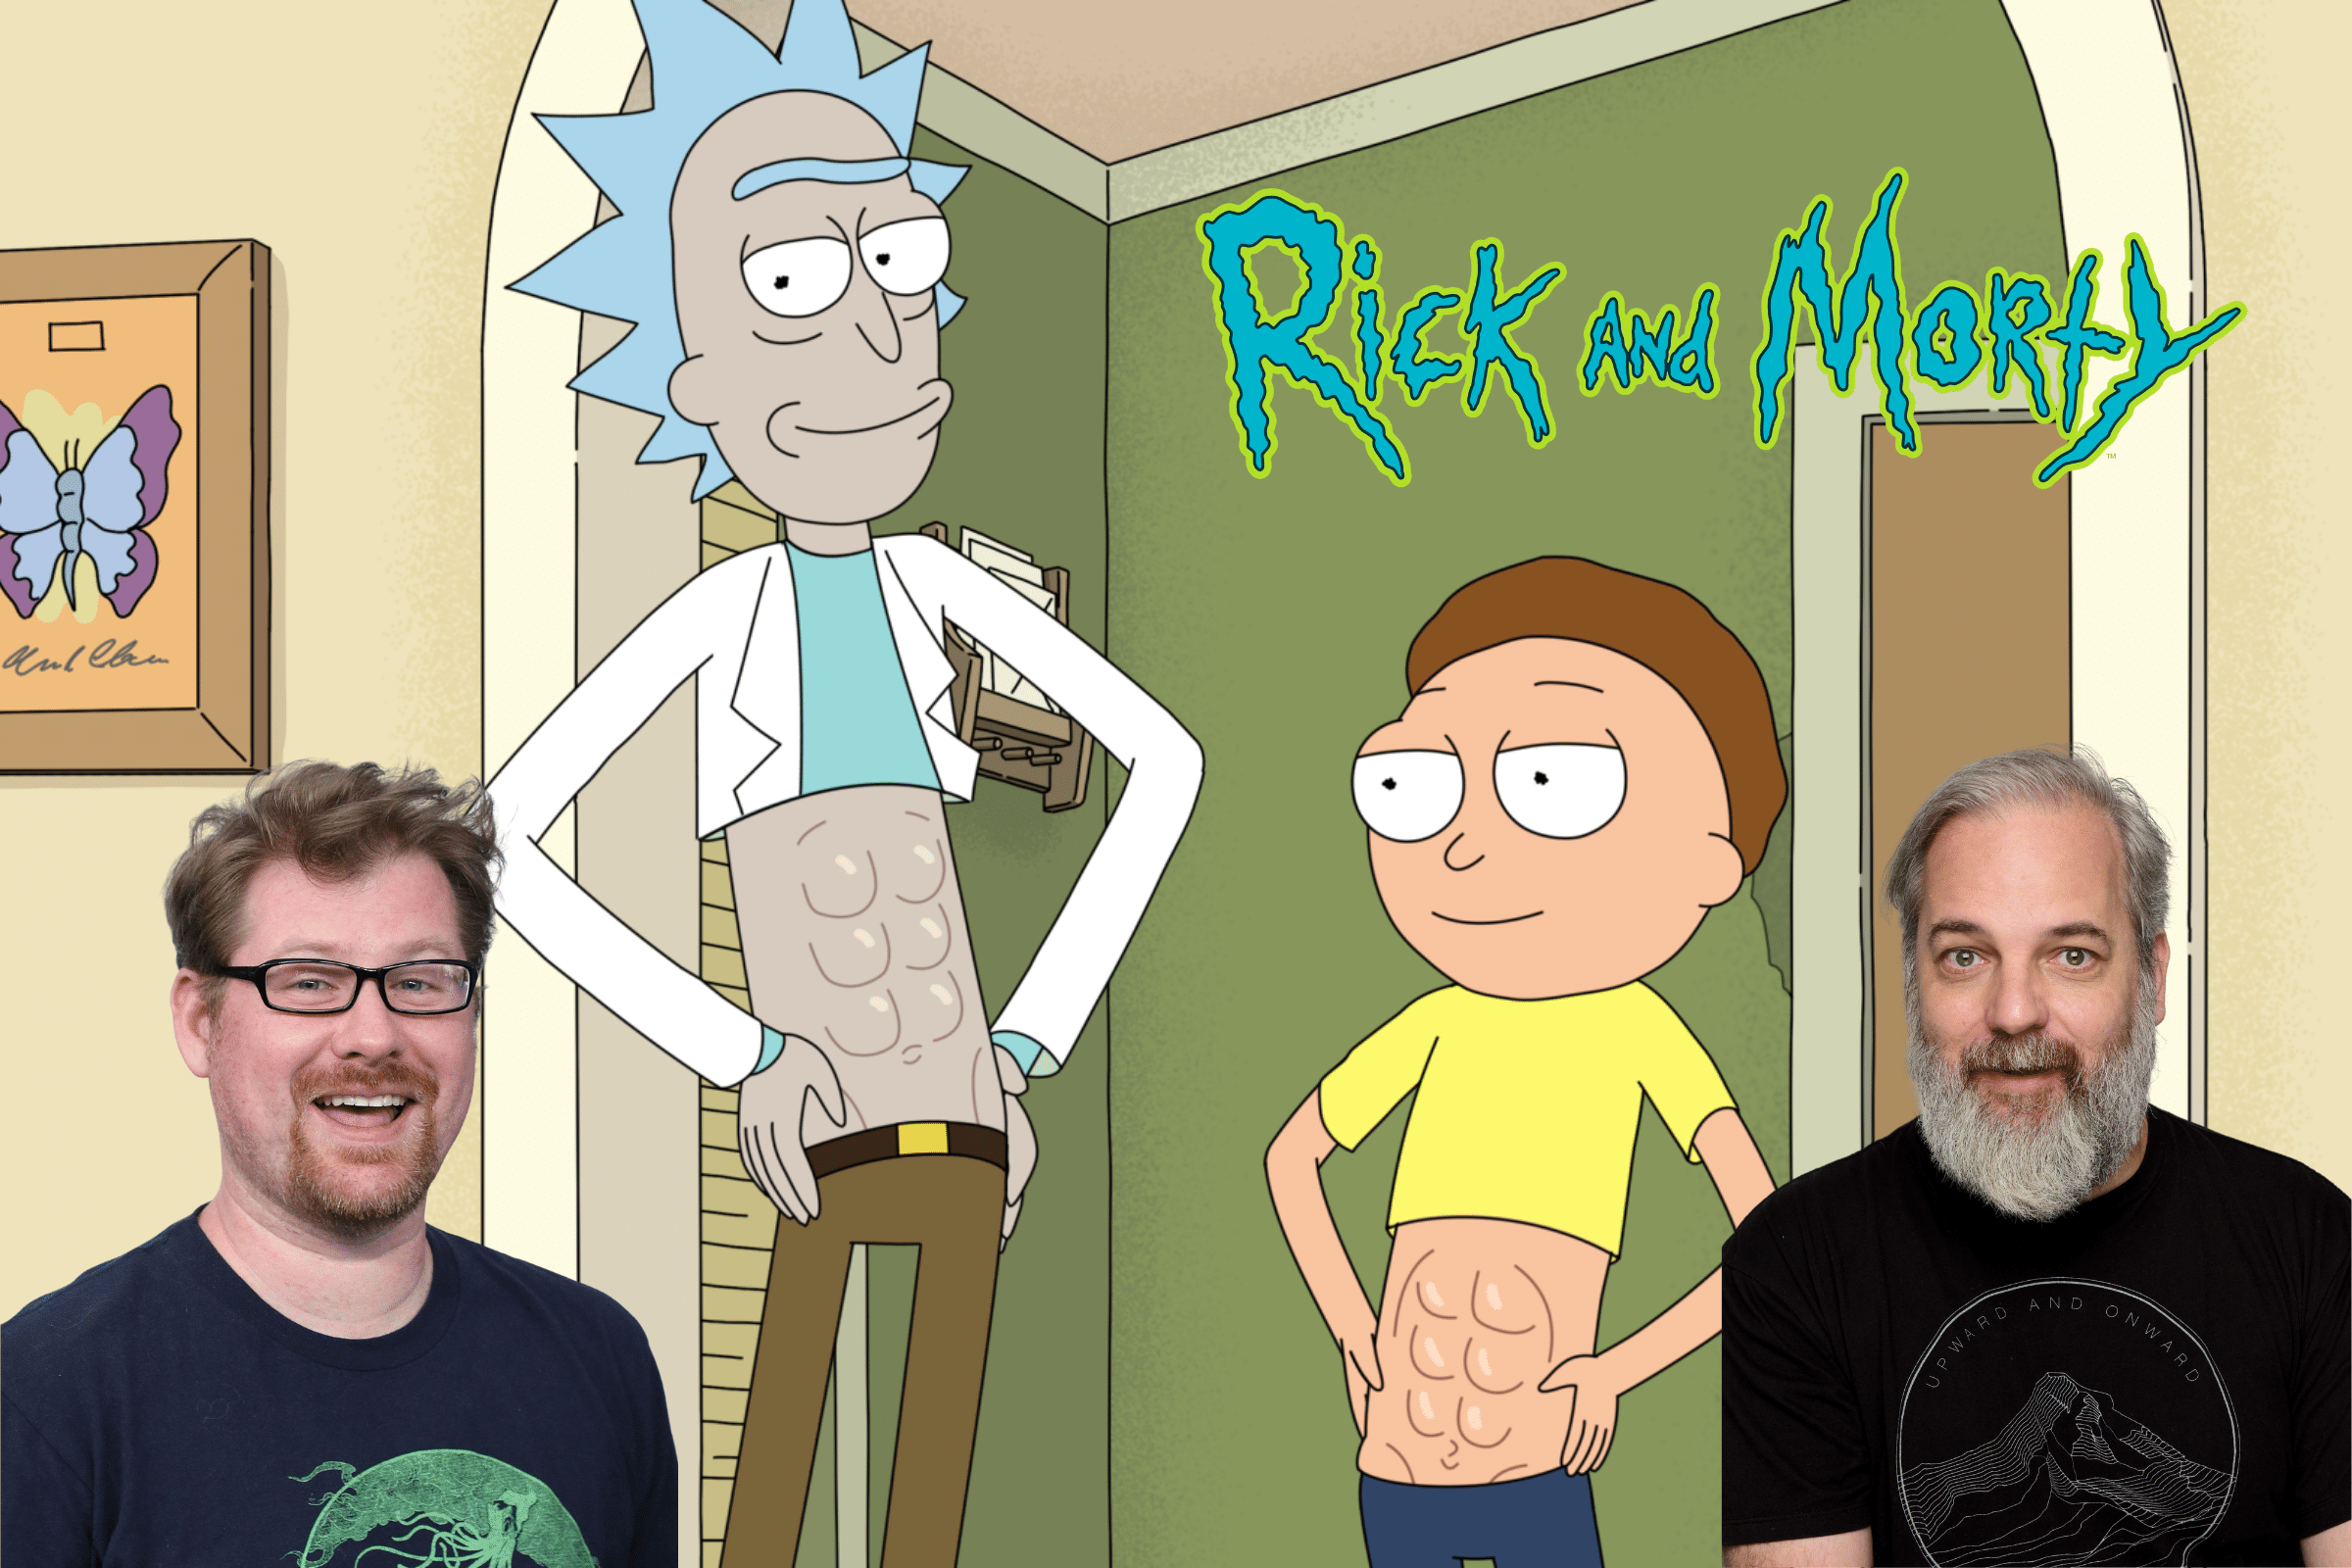 Is rick and morty dead without justin roiland? : r/adultswim